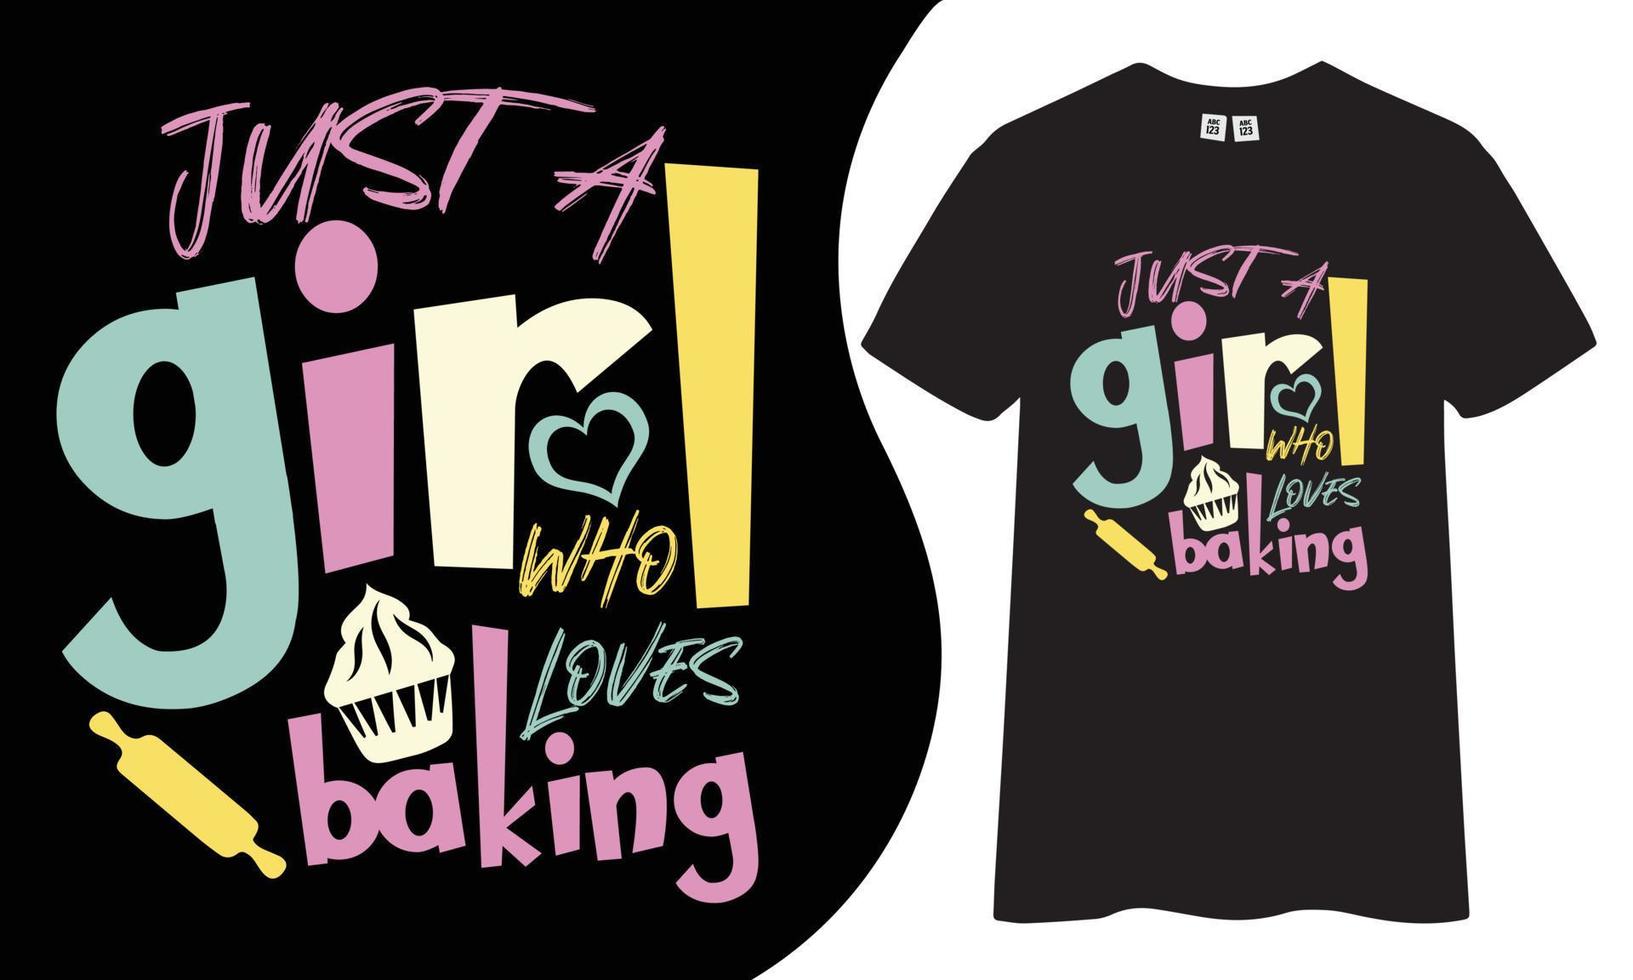 Just a girl who loves baking t shirt design. vector